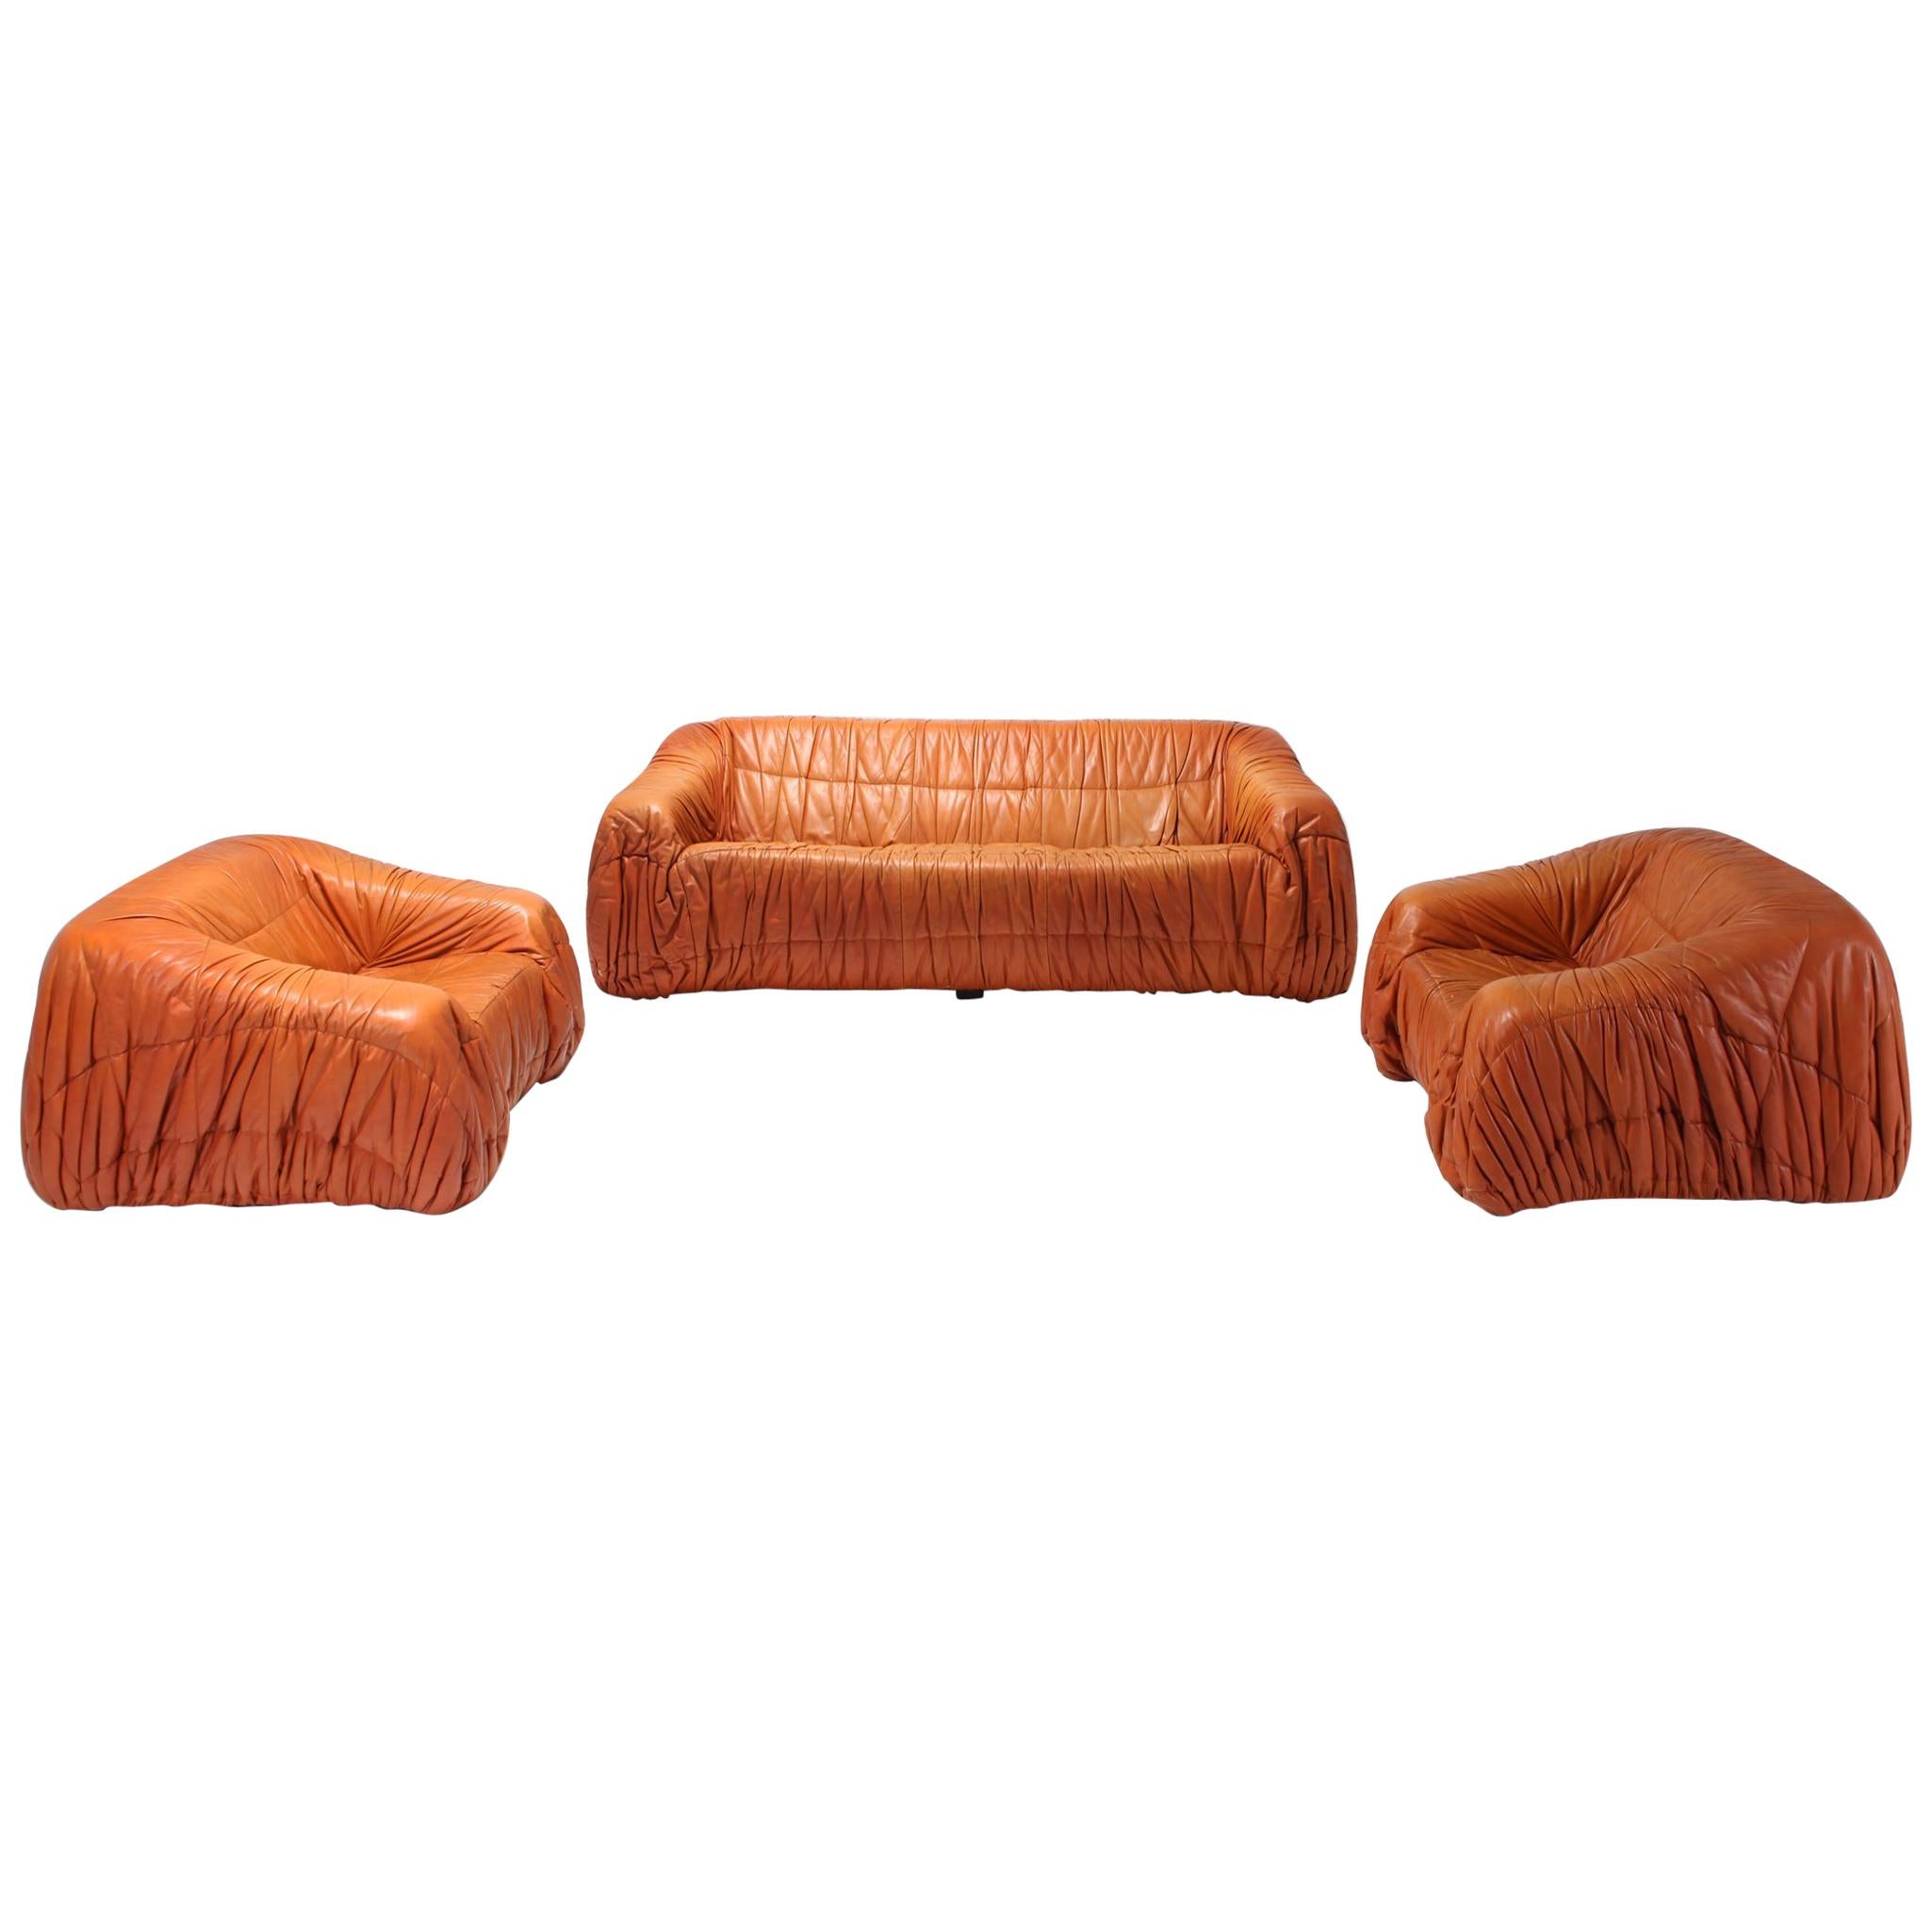 De Pas, D’urbino & Lomazzi designed these Postmodern cognac leather pieces for Dell'Oca in the 1970s.
Fantastic shape completely molded out of foam and therefore extremely comfortable. Covered with gorgeous cognac colored leather. In excellent